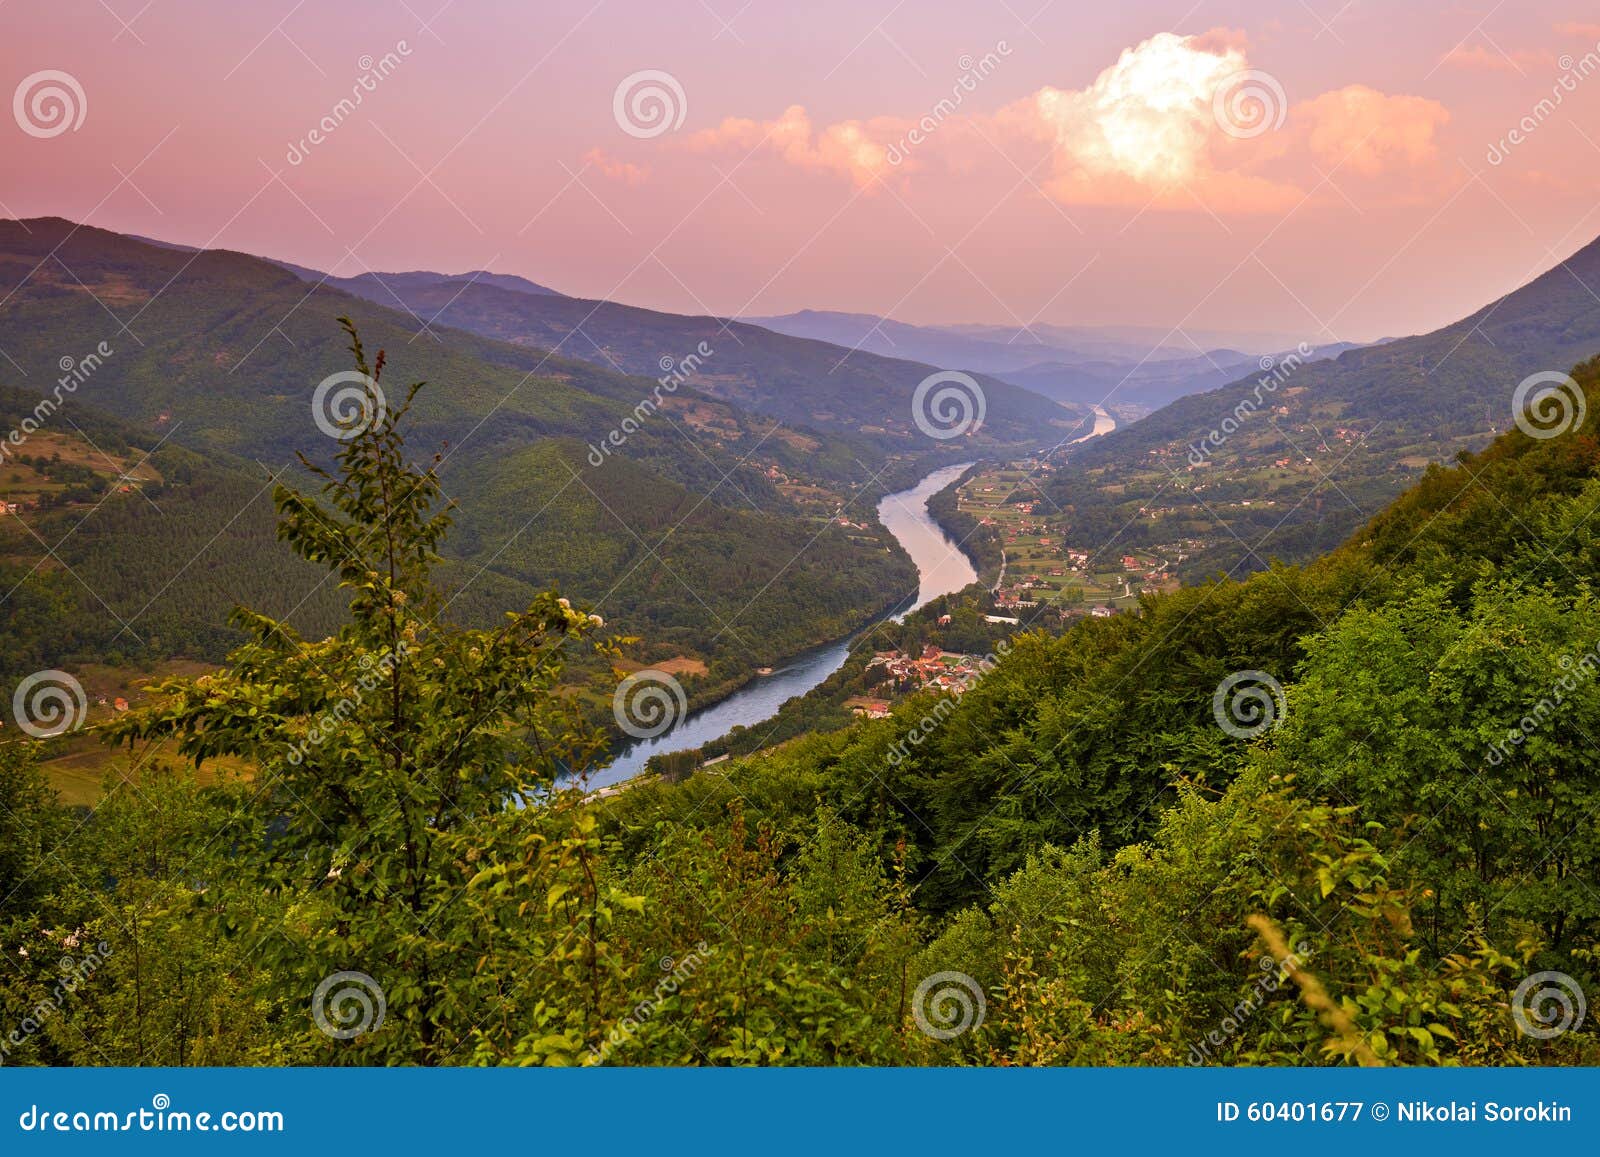 river drina - national nature park in serbia